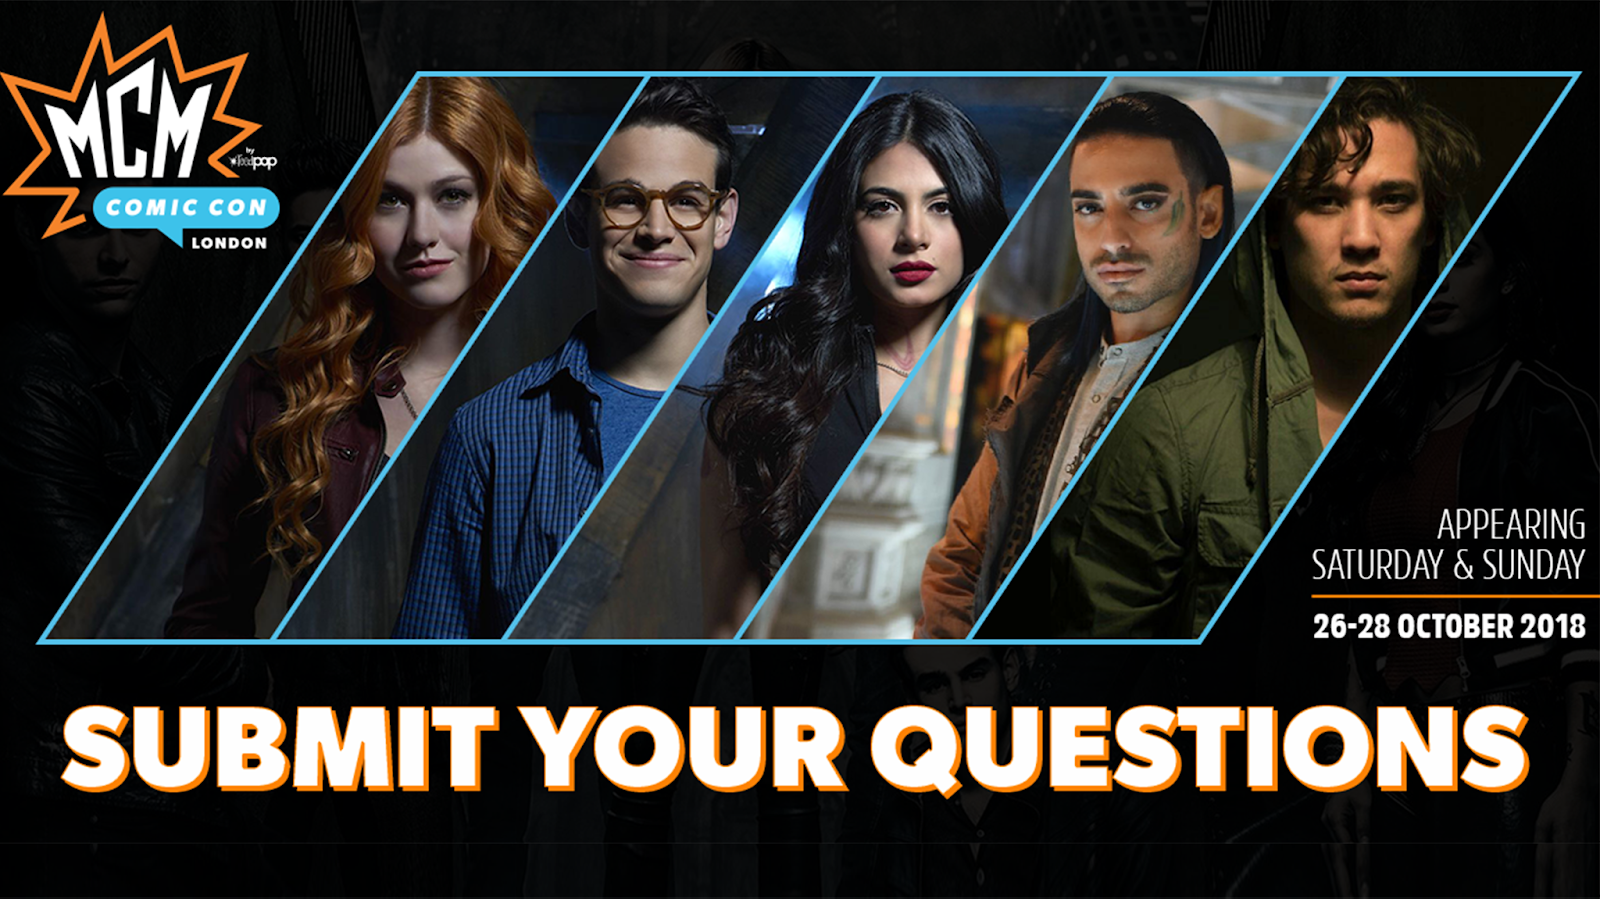 Shadowhunters - Submit your questions for the cast at MCM Comic Con London #SaveShadowhunters